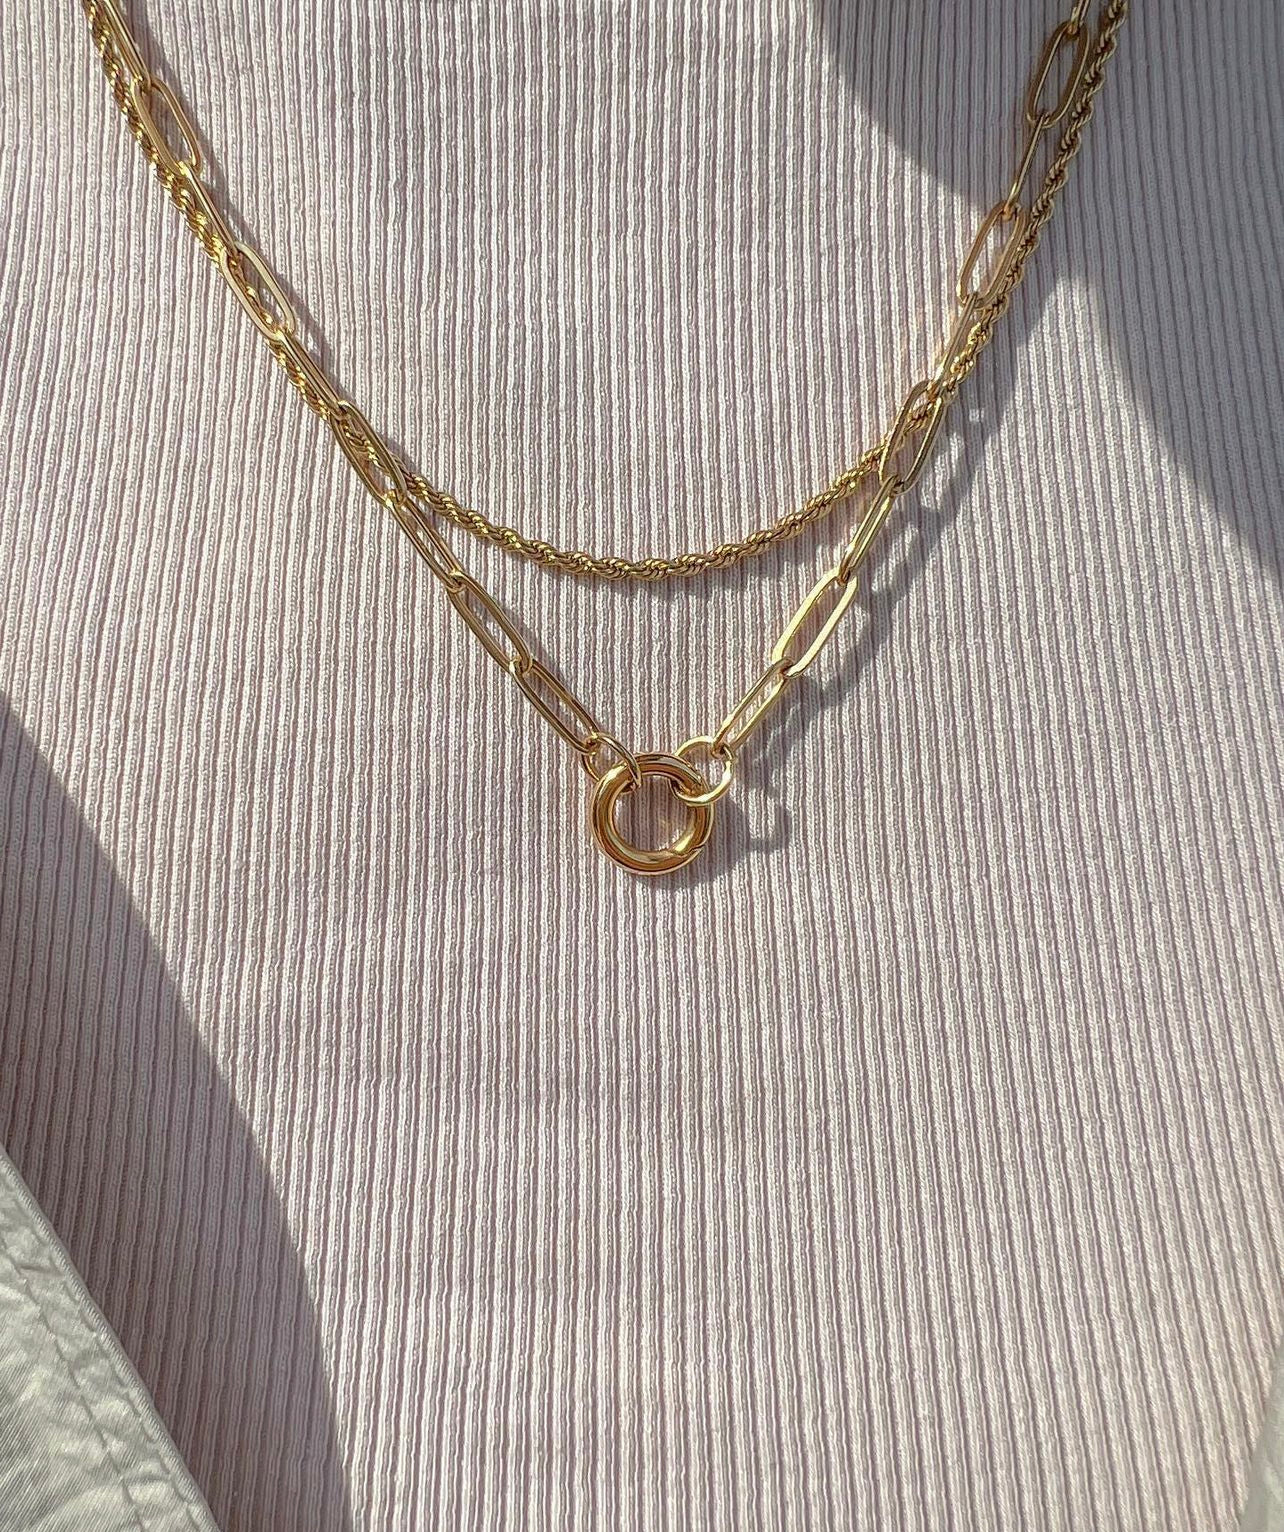 Keeper necklace Gold